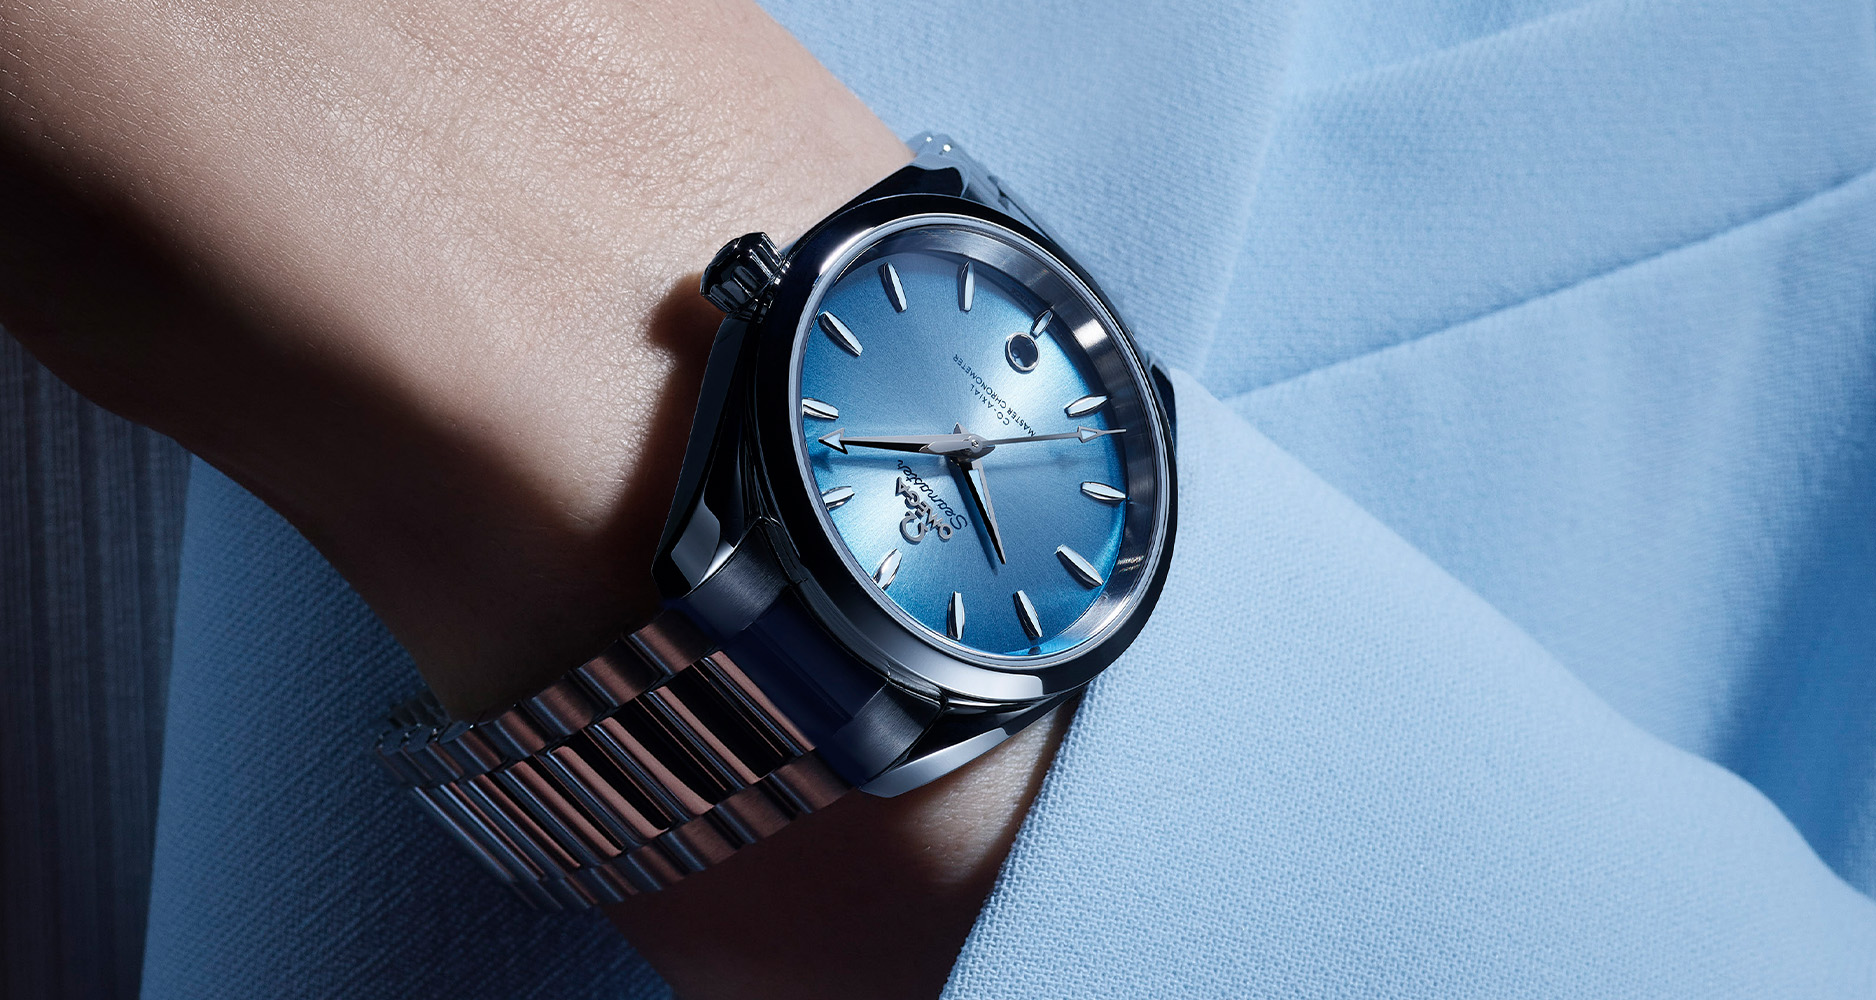 The Omega Seamaster Aqua Terra 150M in steel with Summer Blue dial.